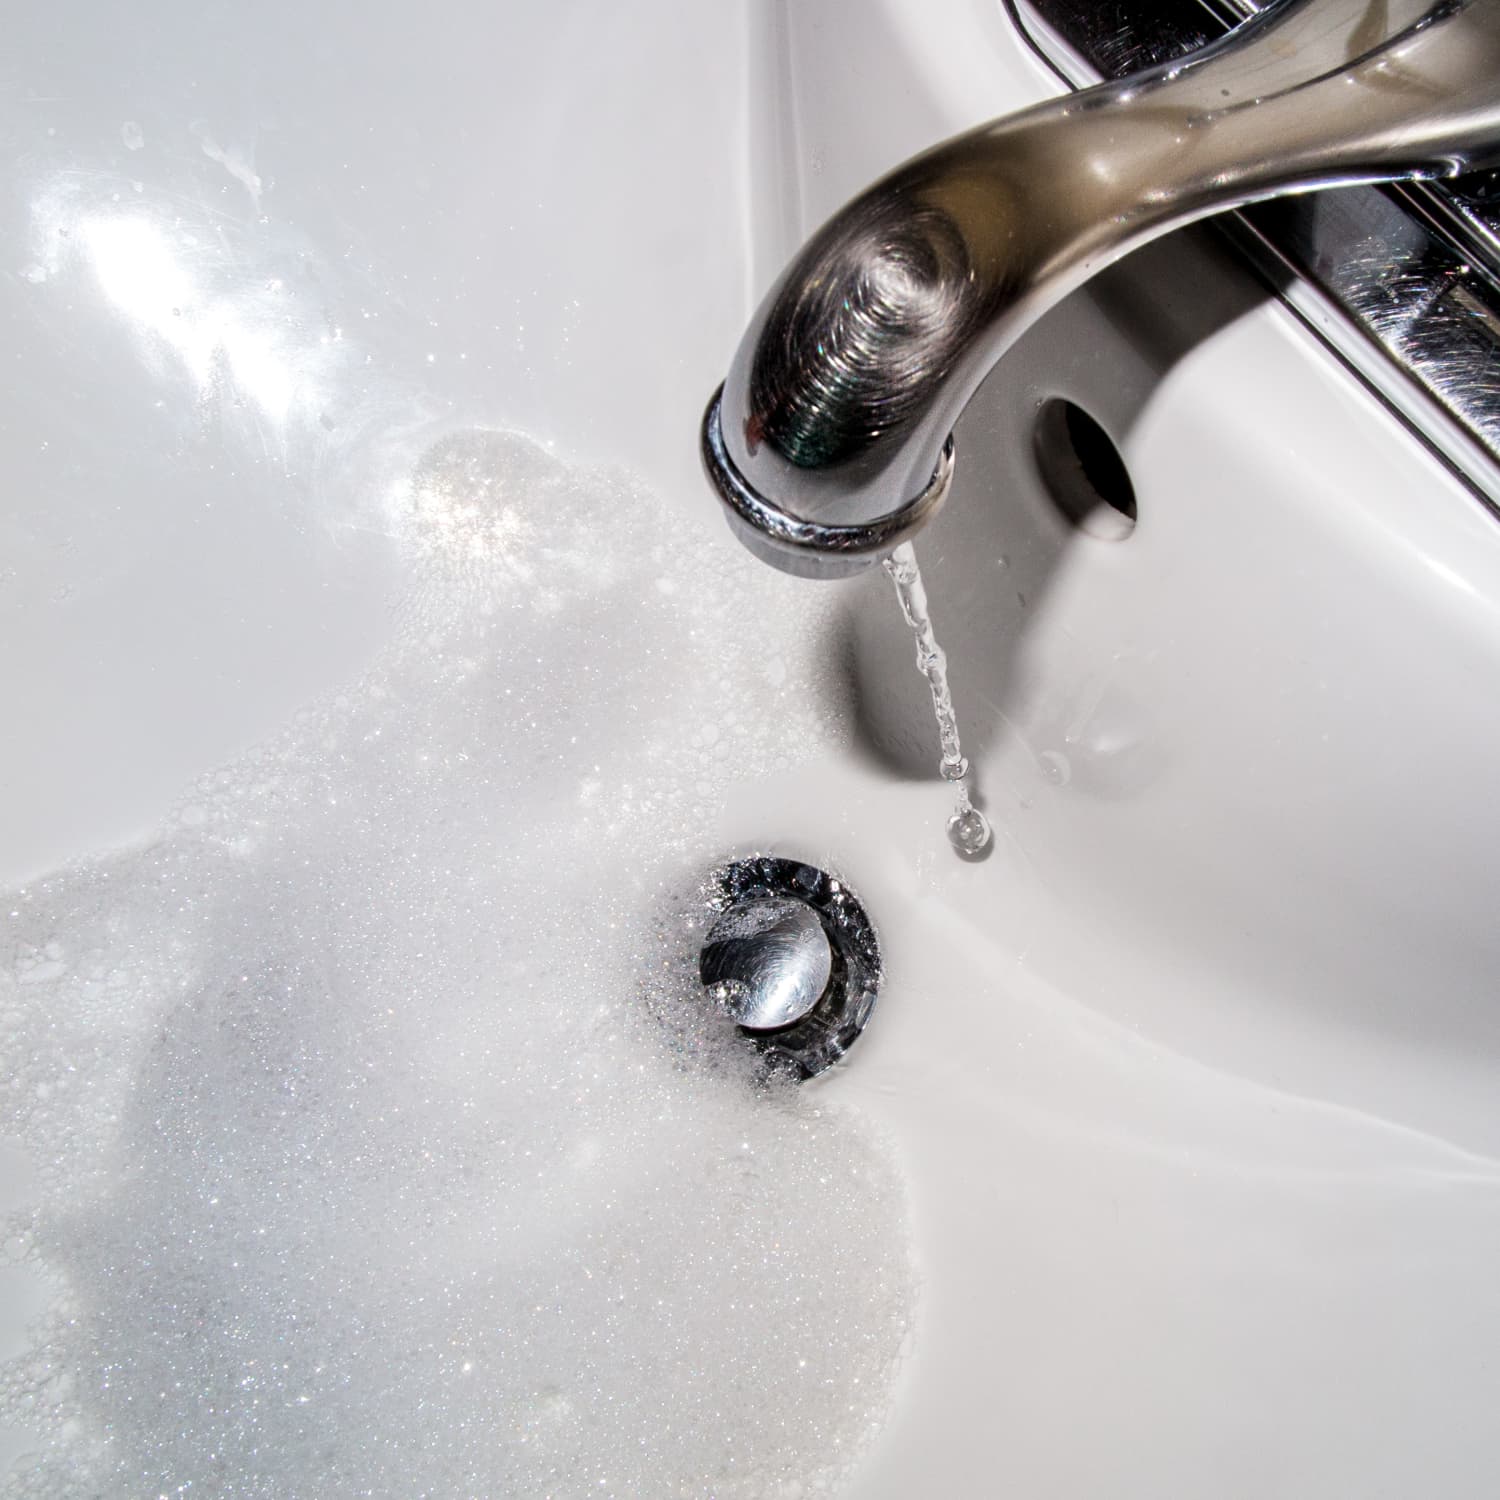 How To…Get Rid of Bleach Stains in the Bathroom